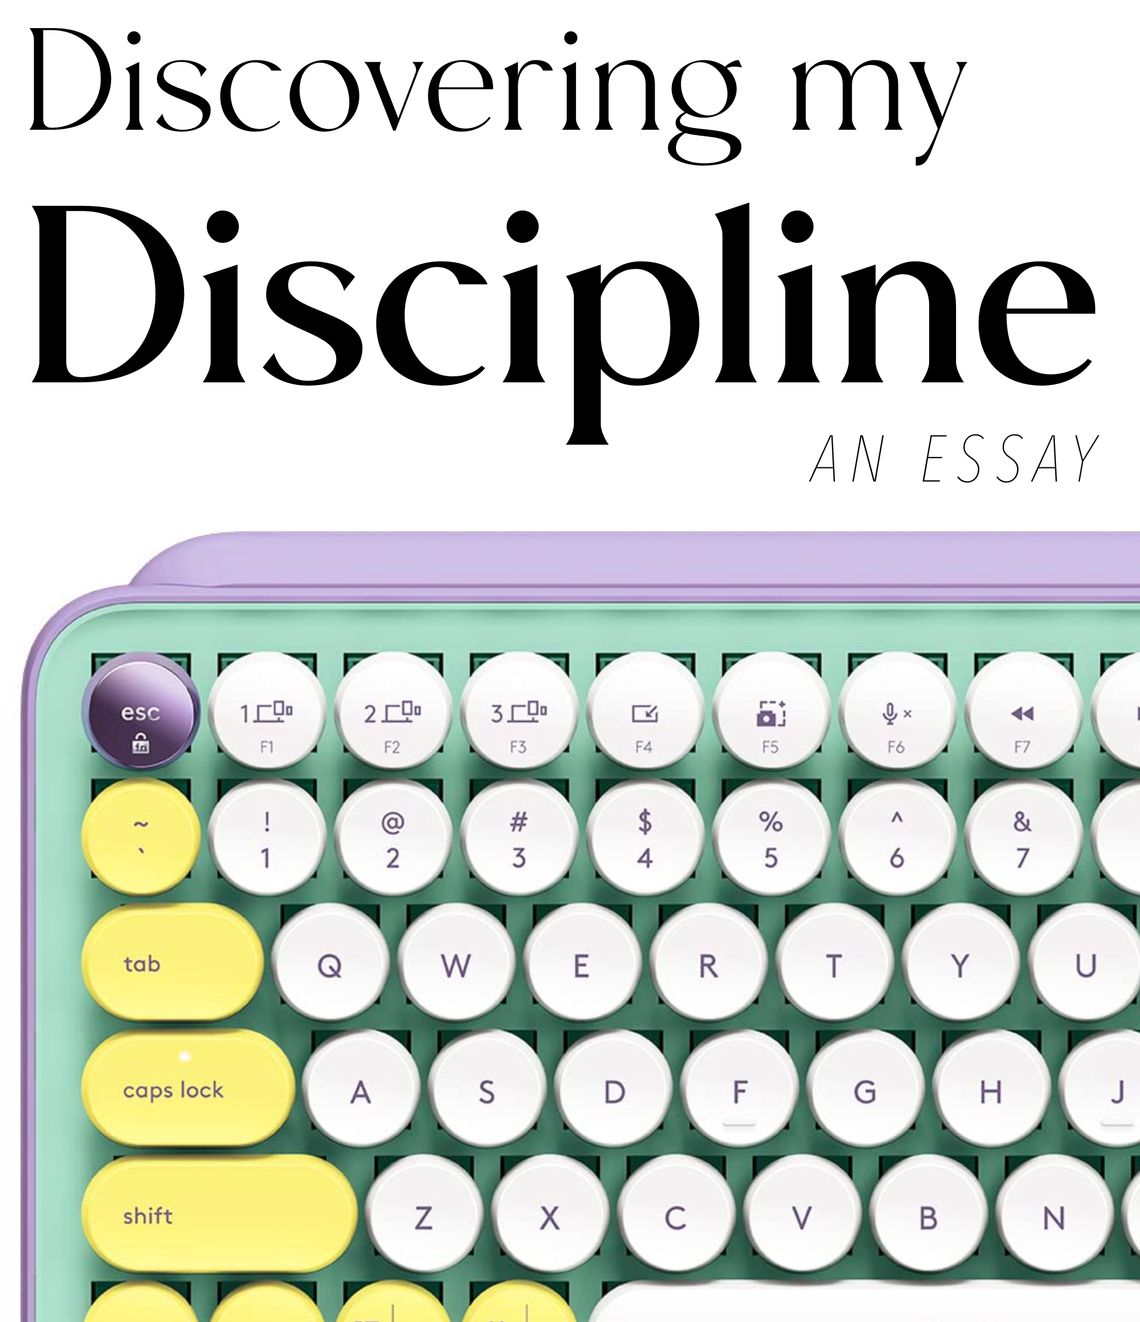 Discovering my Discipline